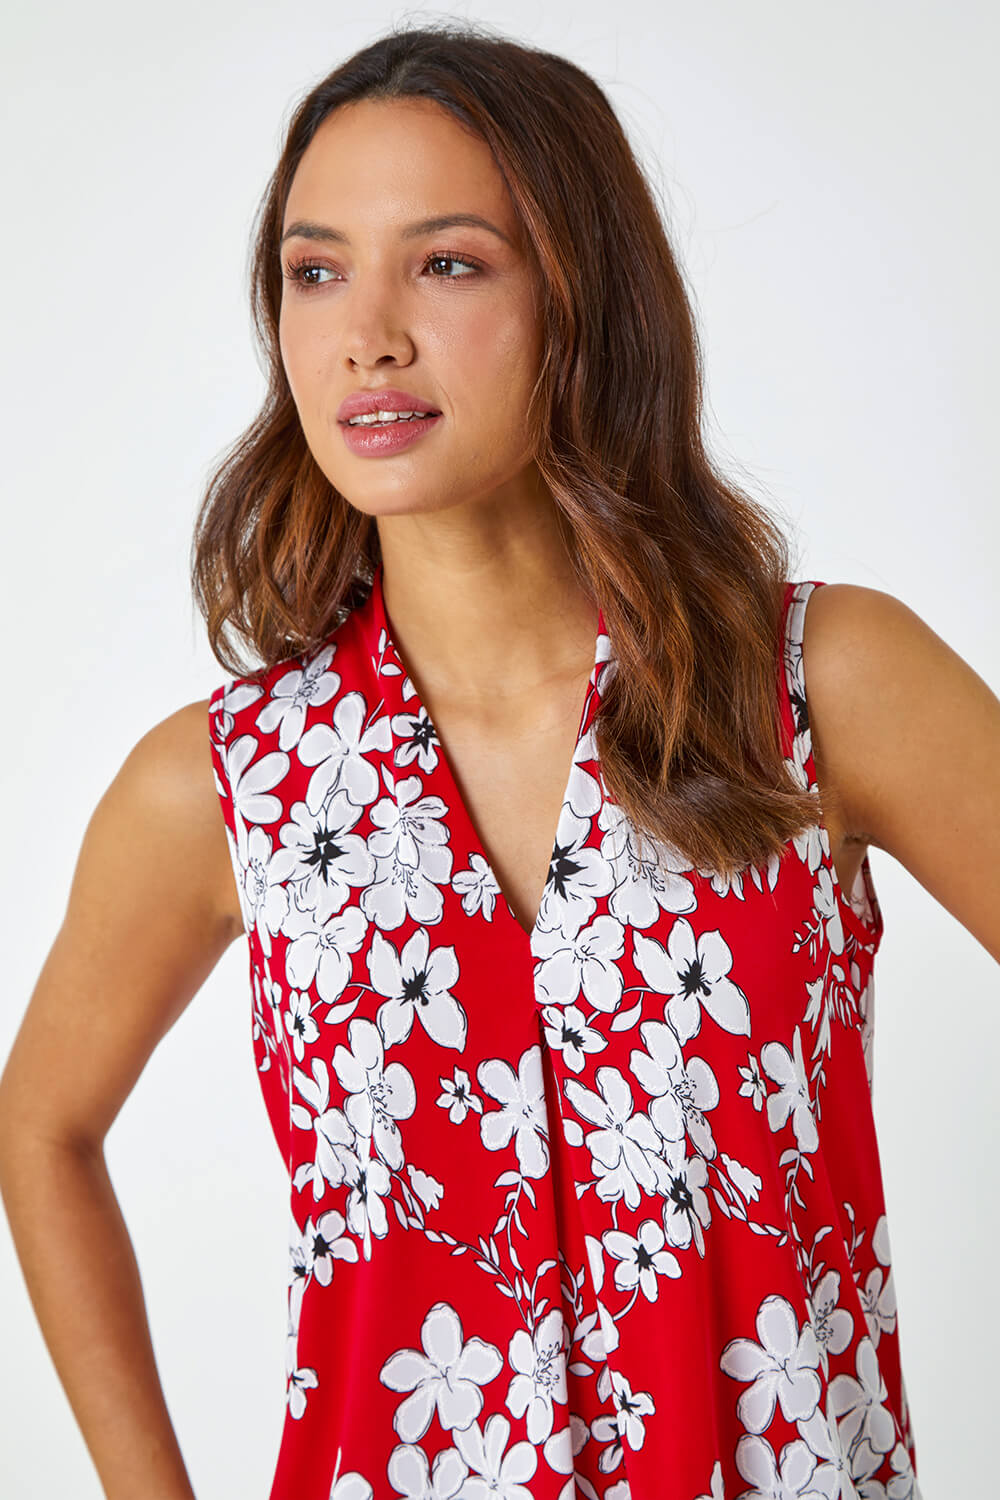 Red Textured Floral Print Sleeveless Top, Image 4 of 5